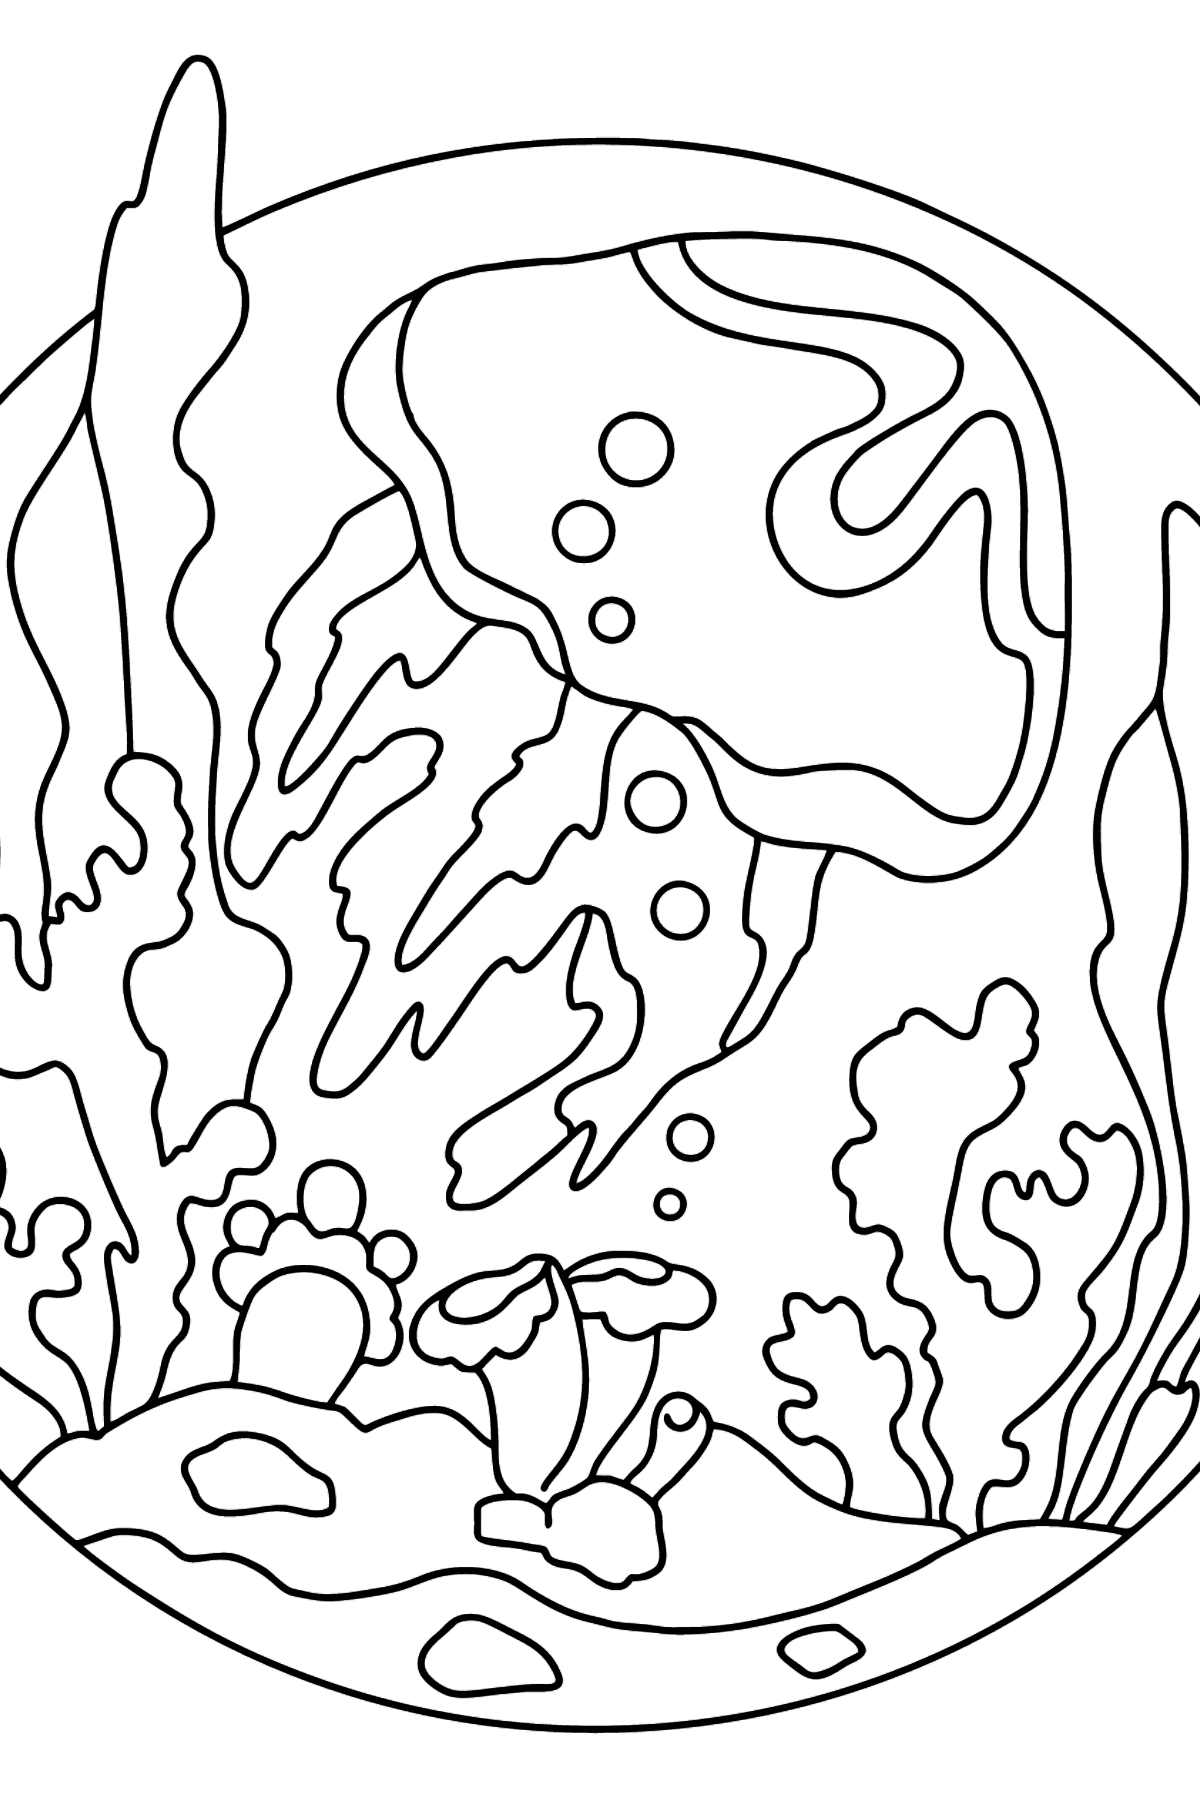 Jellyfish Coloring Page (Easy) - Coloring Pages for Kids